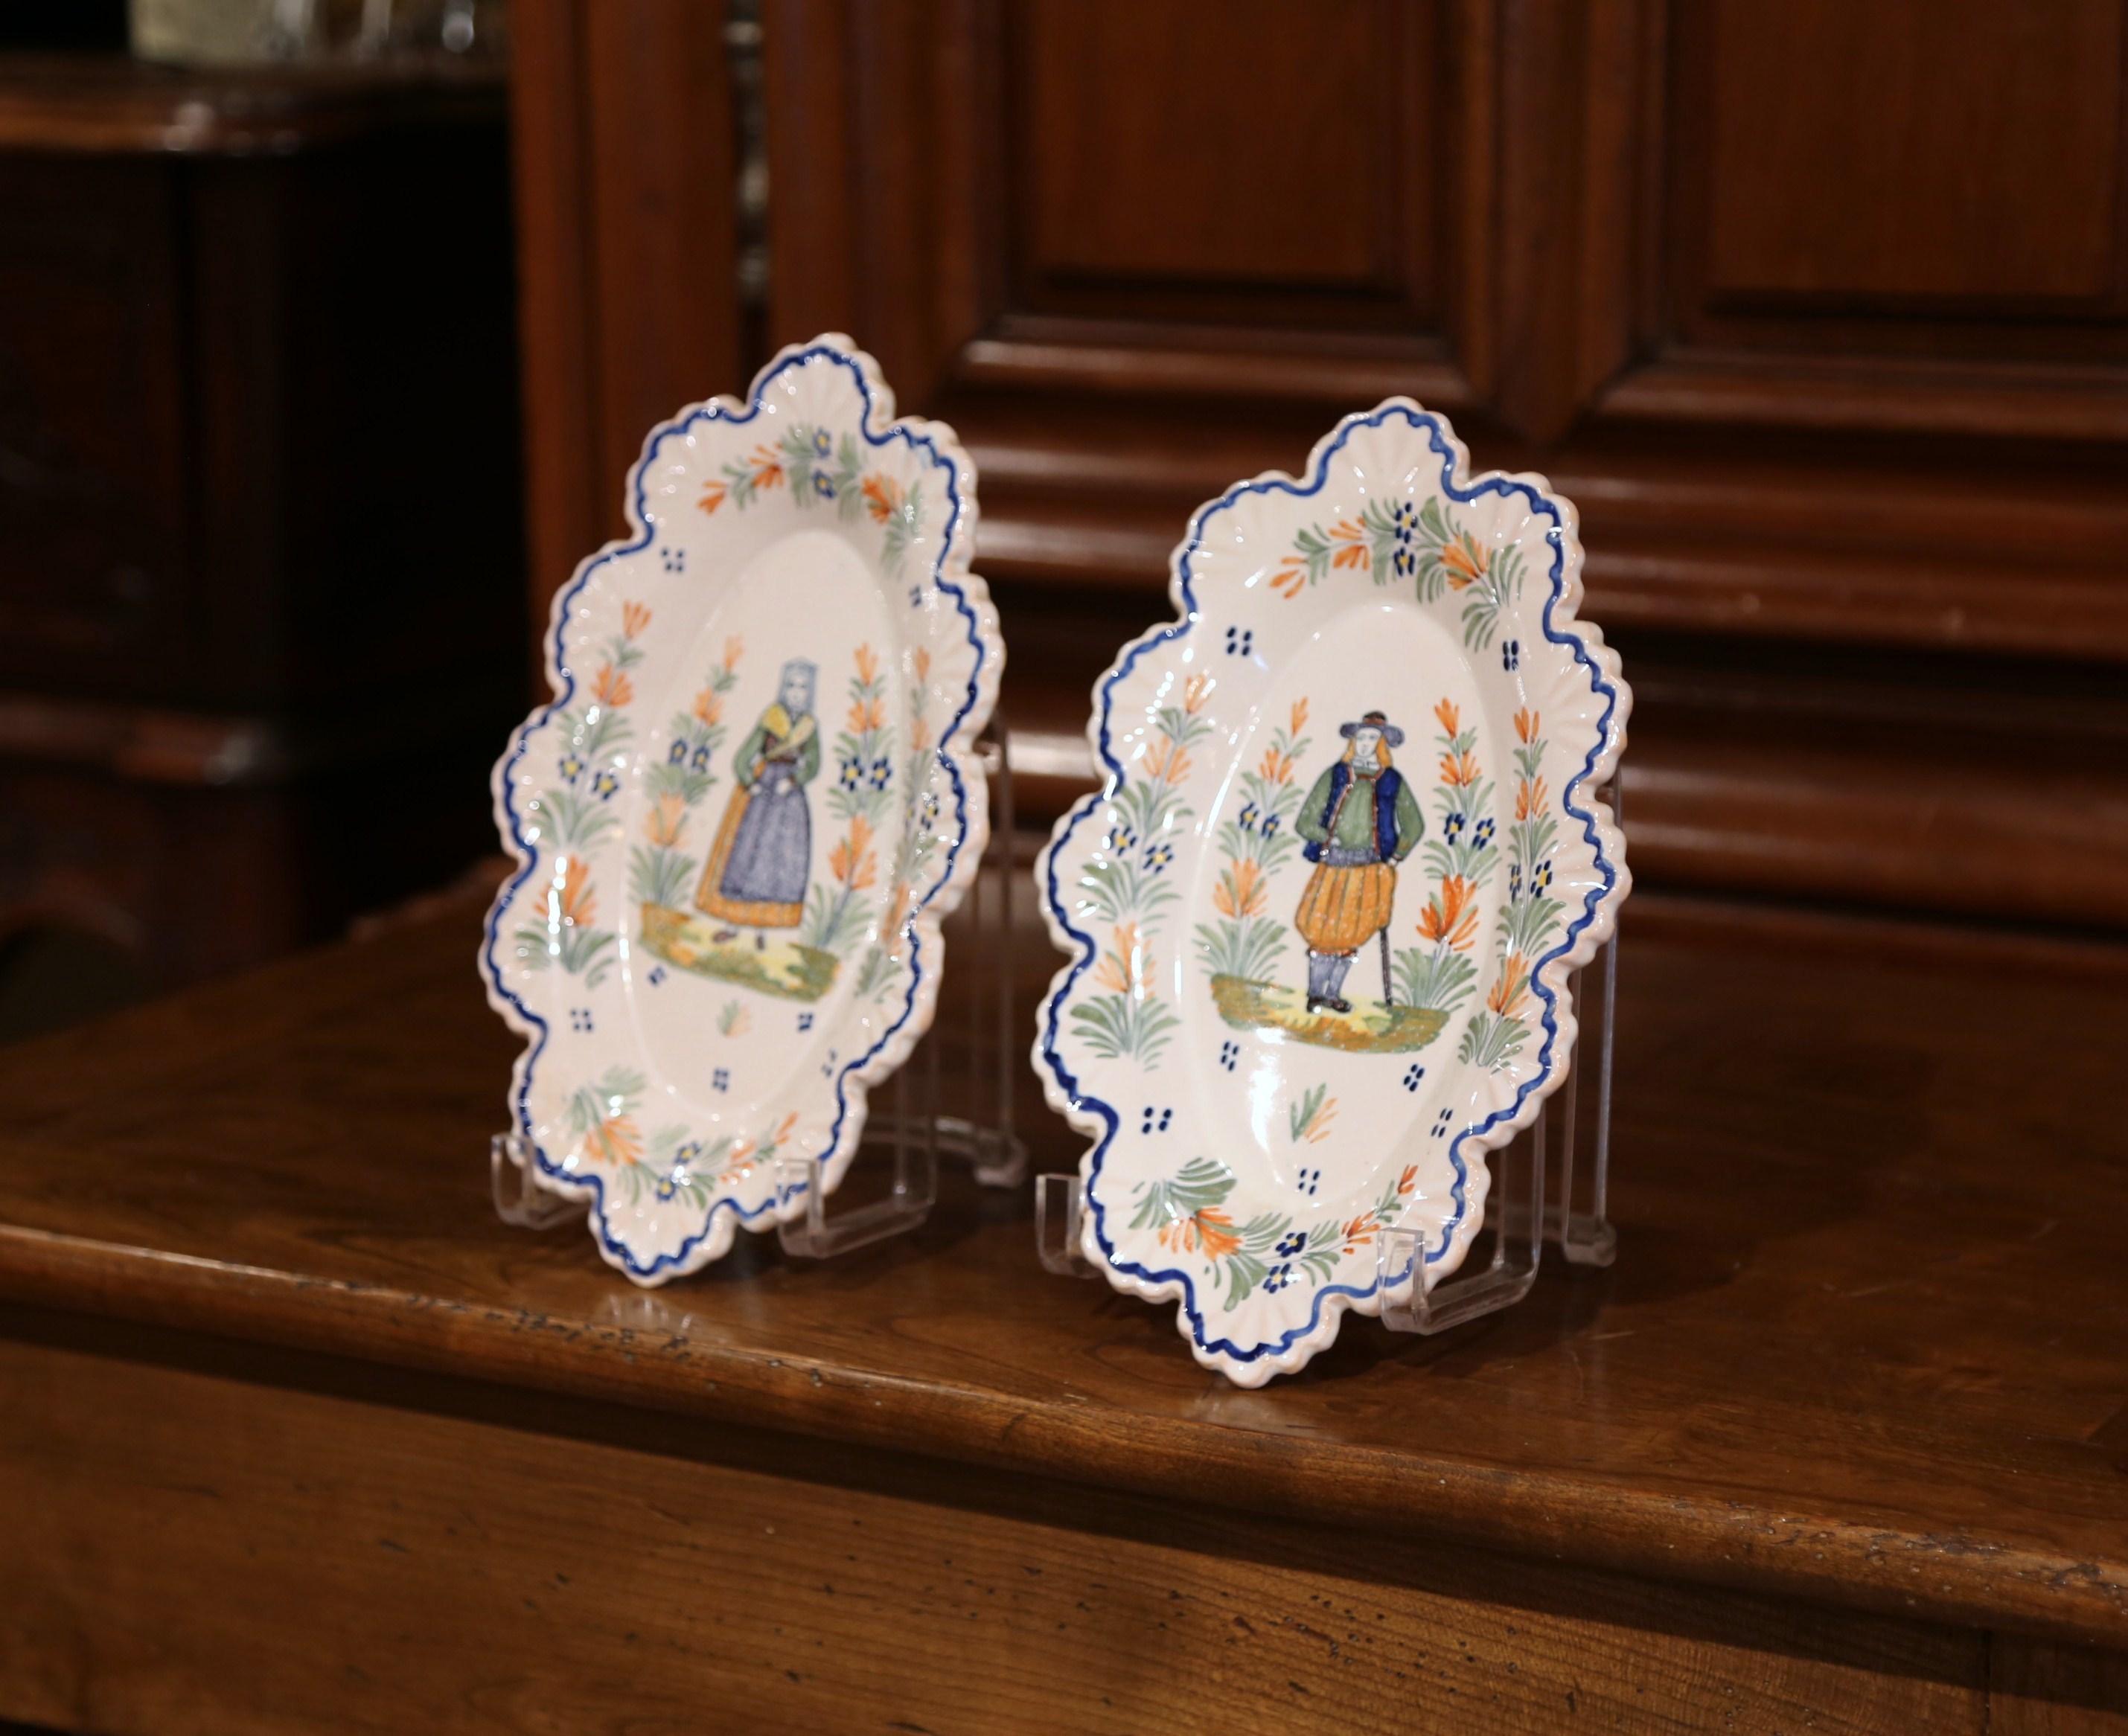 Decorate a kitchen wall or a shelf with this pair of antique decorative plates. Crafted in Brittany, circa 1890, each faience plate is hand painted with traditional Breton figure motifs, and is further embellished with floral decor. Both platters